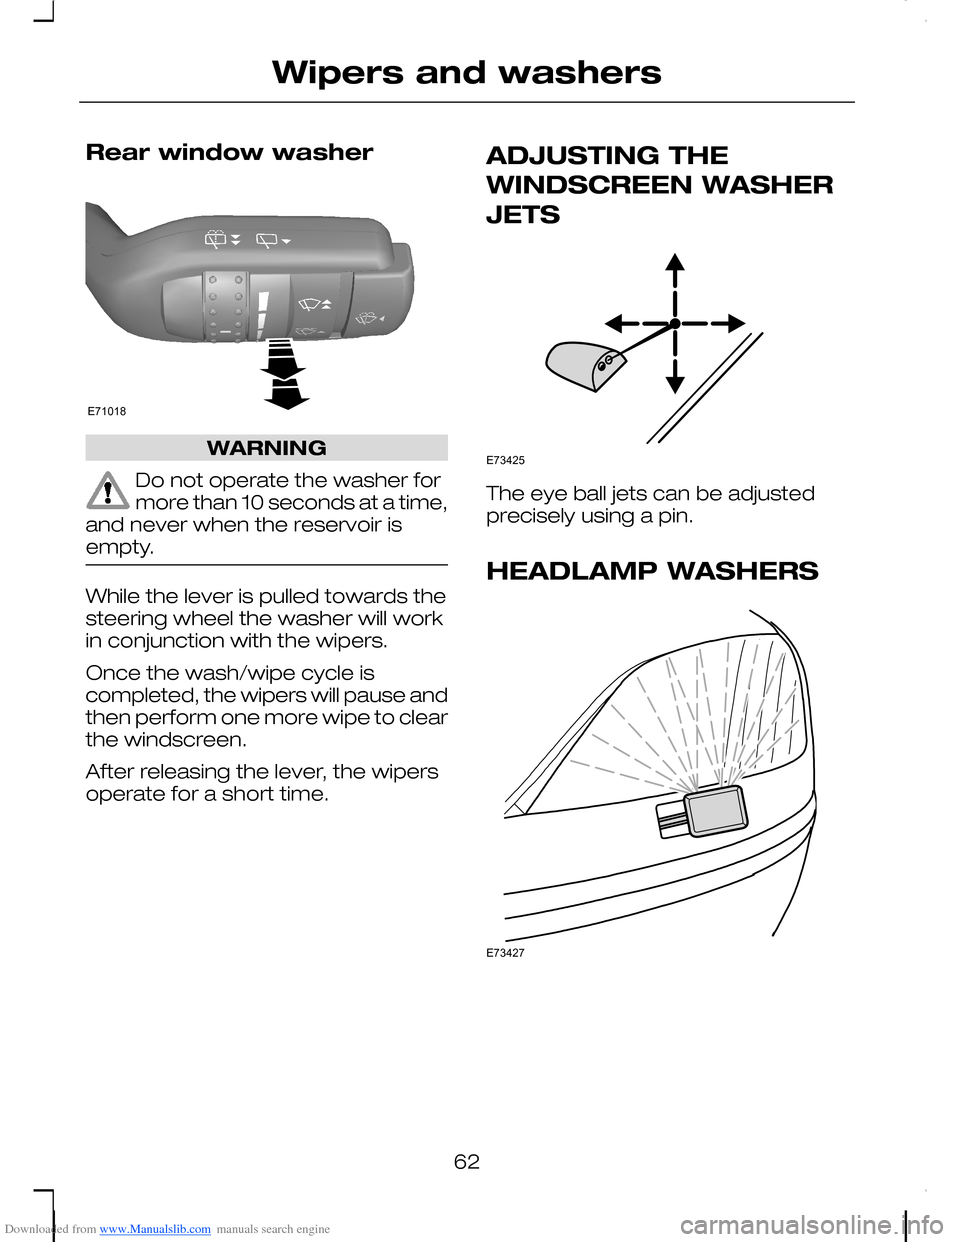 FORD C MAX 2008 1.G Owners Guide Downloaded from www.Manualslib.com manuals search engine Rear window washer
WARNING
Do not operate the washer formore than 10 seconds at a time,and never when the reservoir isempty.
While the lever is